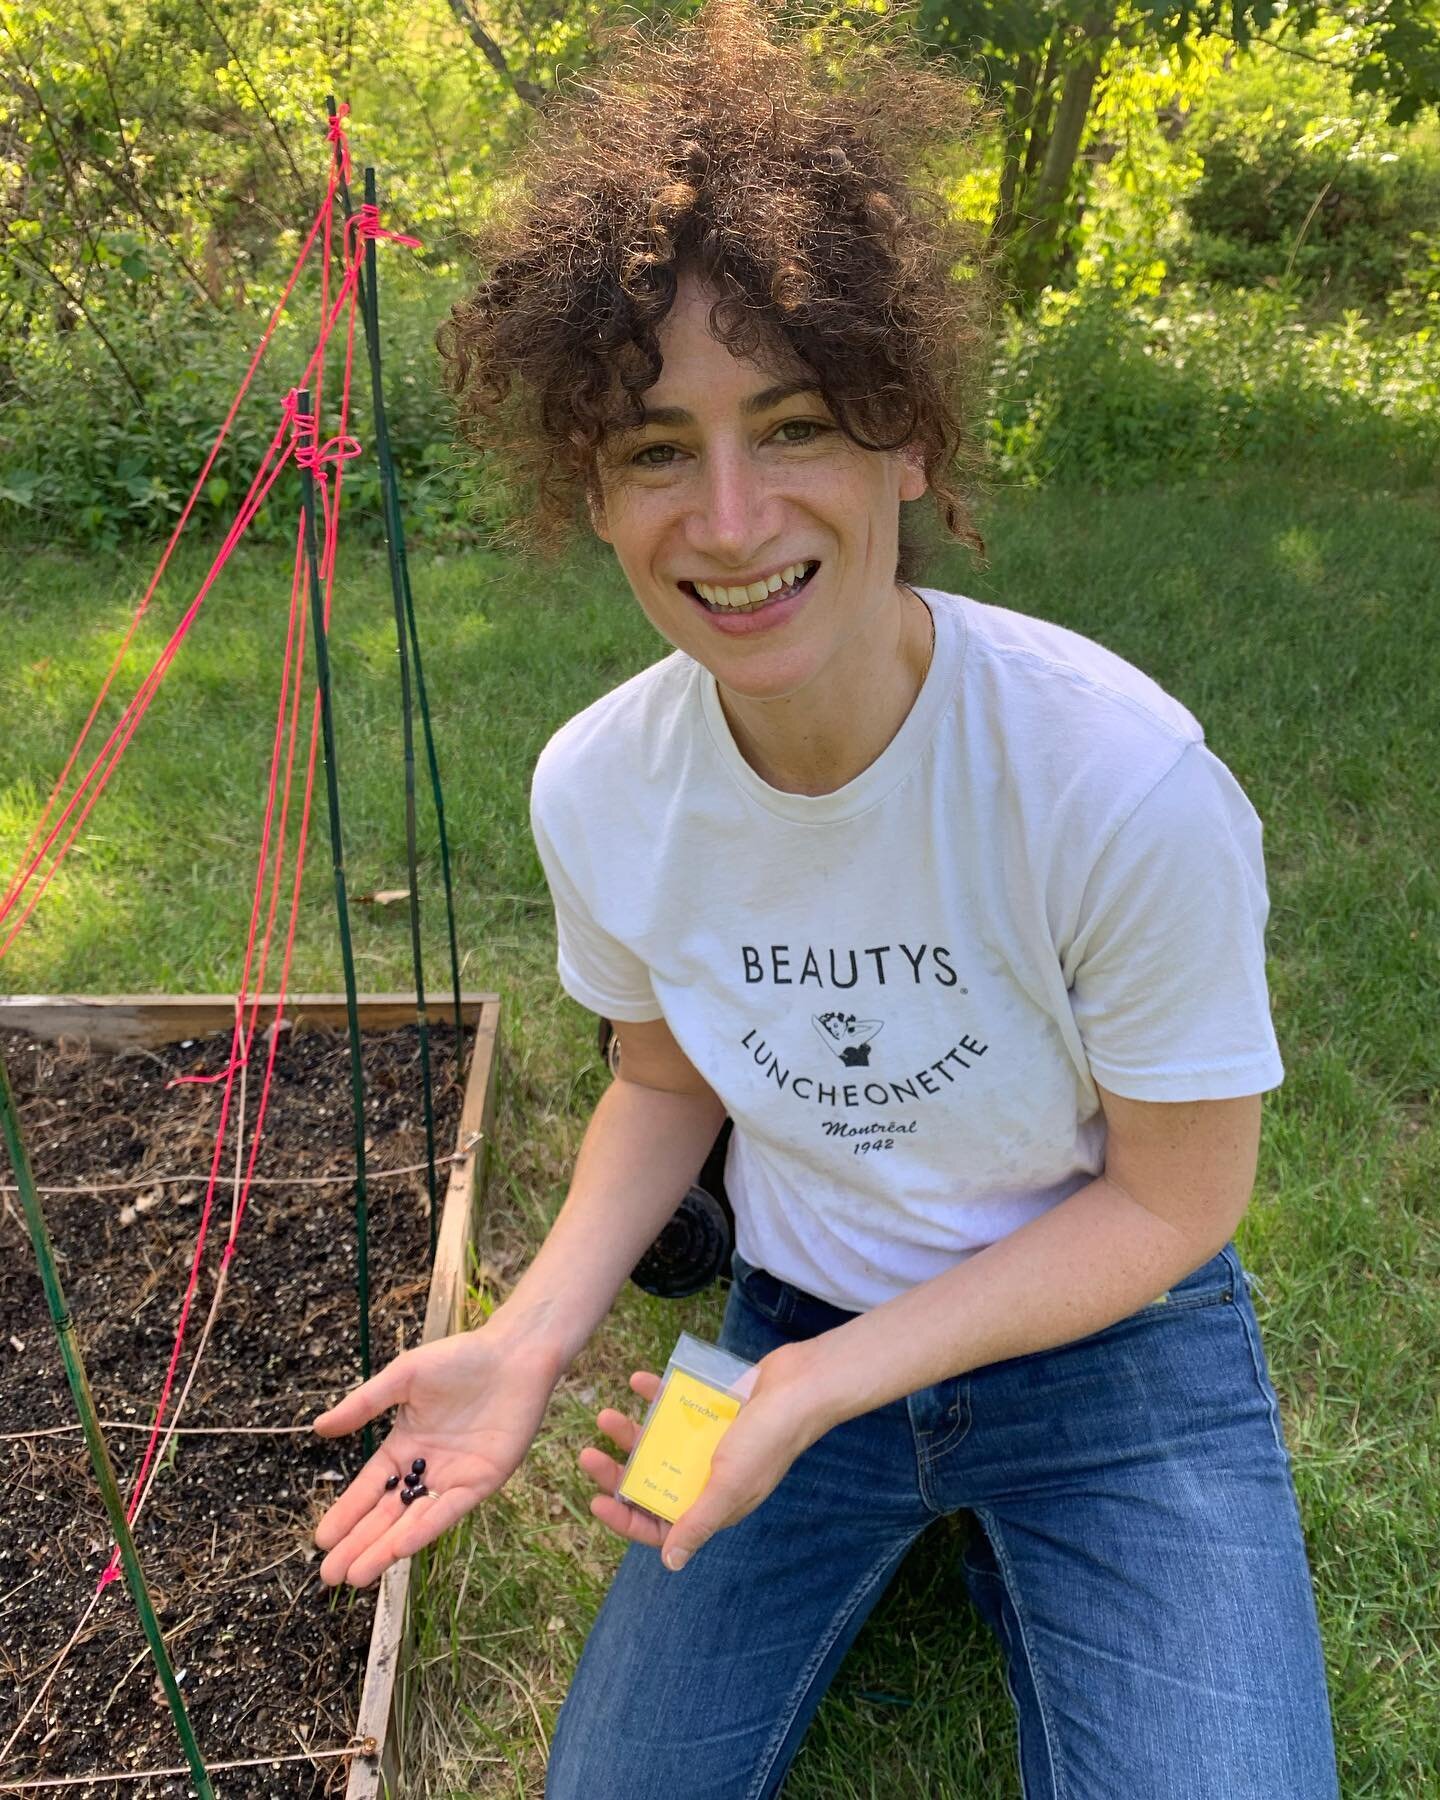 NYU Seed Library co-founder @leighollman developed the bean project as a way to learn more about her own seed saving heritage, and she is still searching! 

She says: &ldquo;As part of this process, I conducted interviews with extended cousins that I